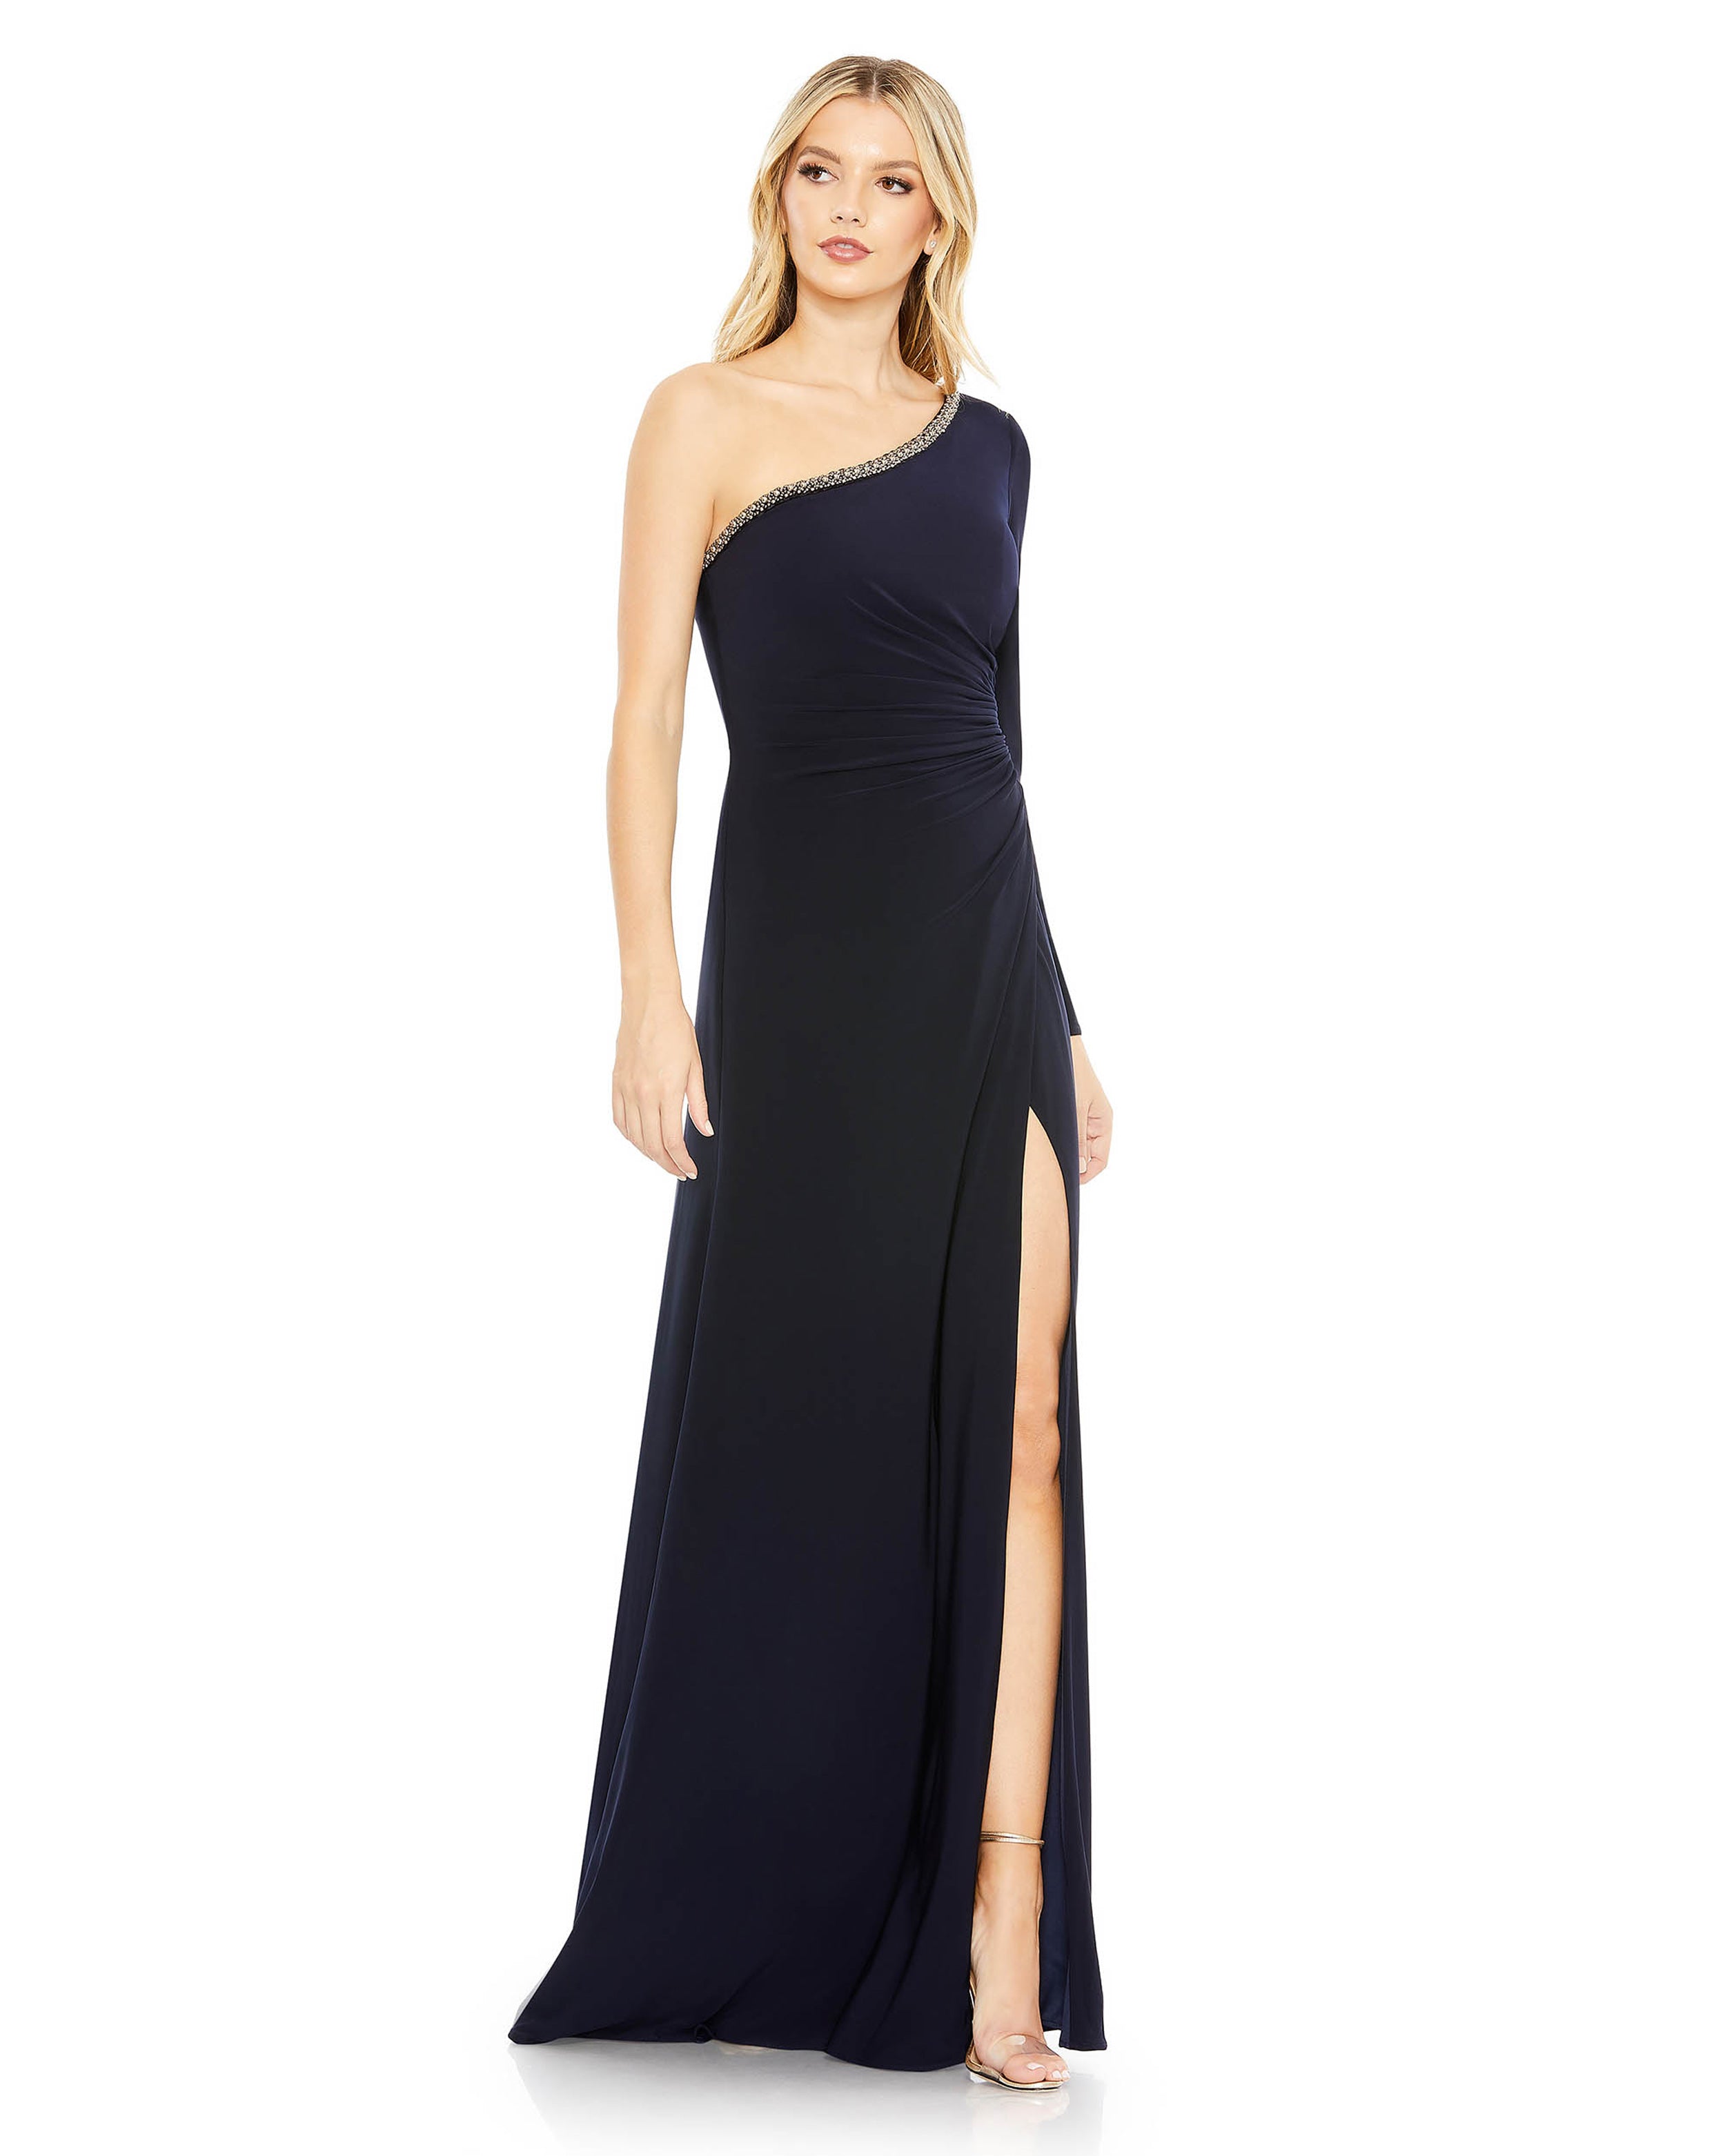 Draped One Sleeve Jersey Gown - FINAL SALE